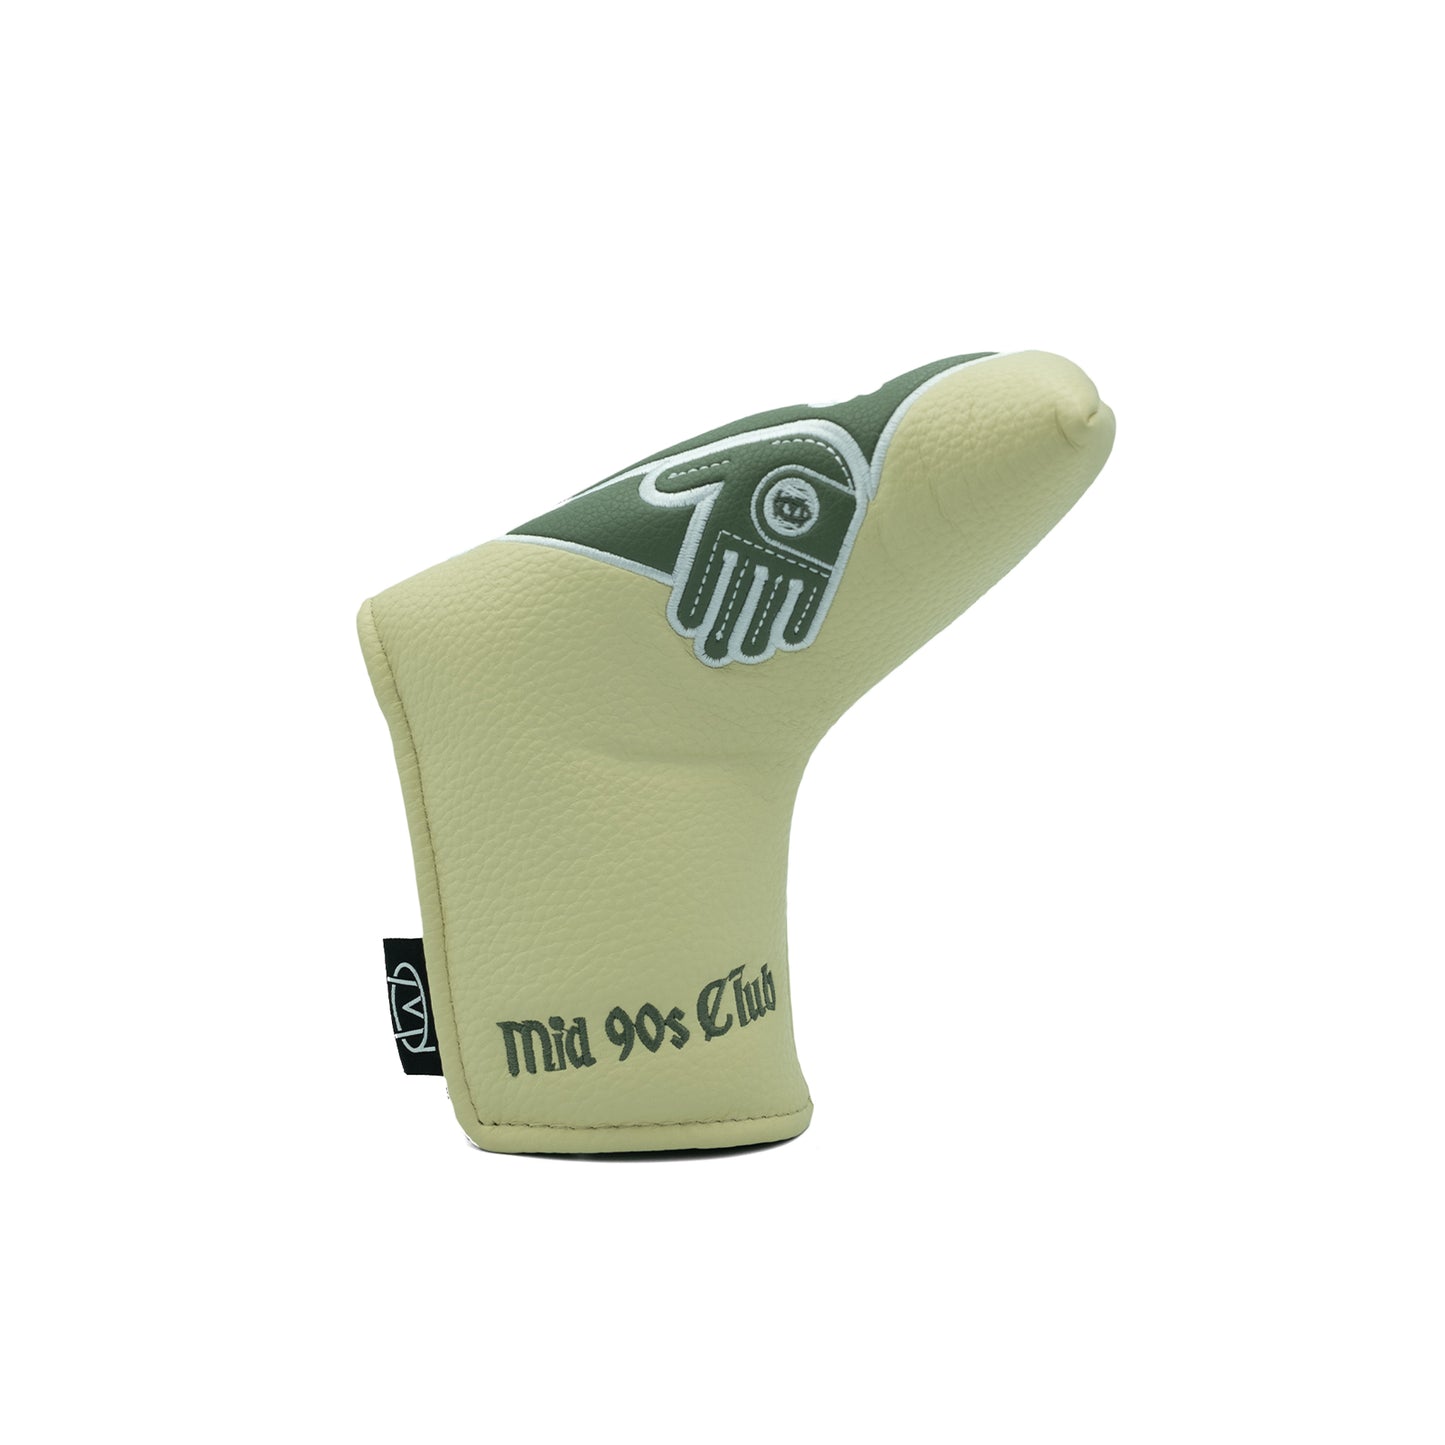 Mid 90's Club x Puttwell Blade Putter Cover